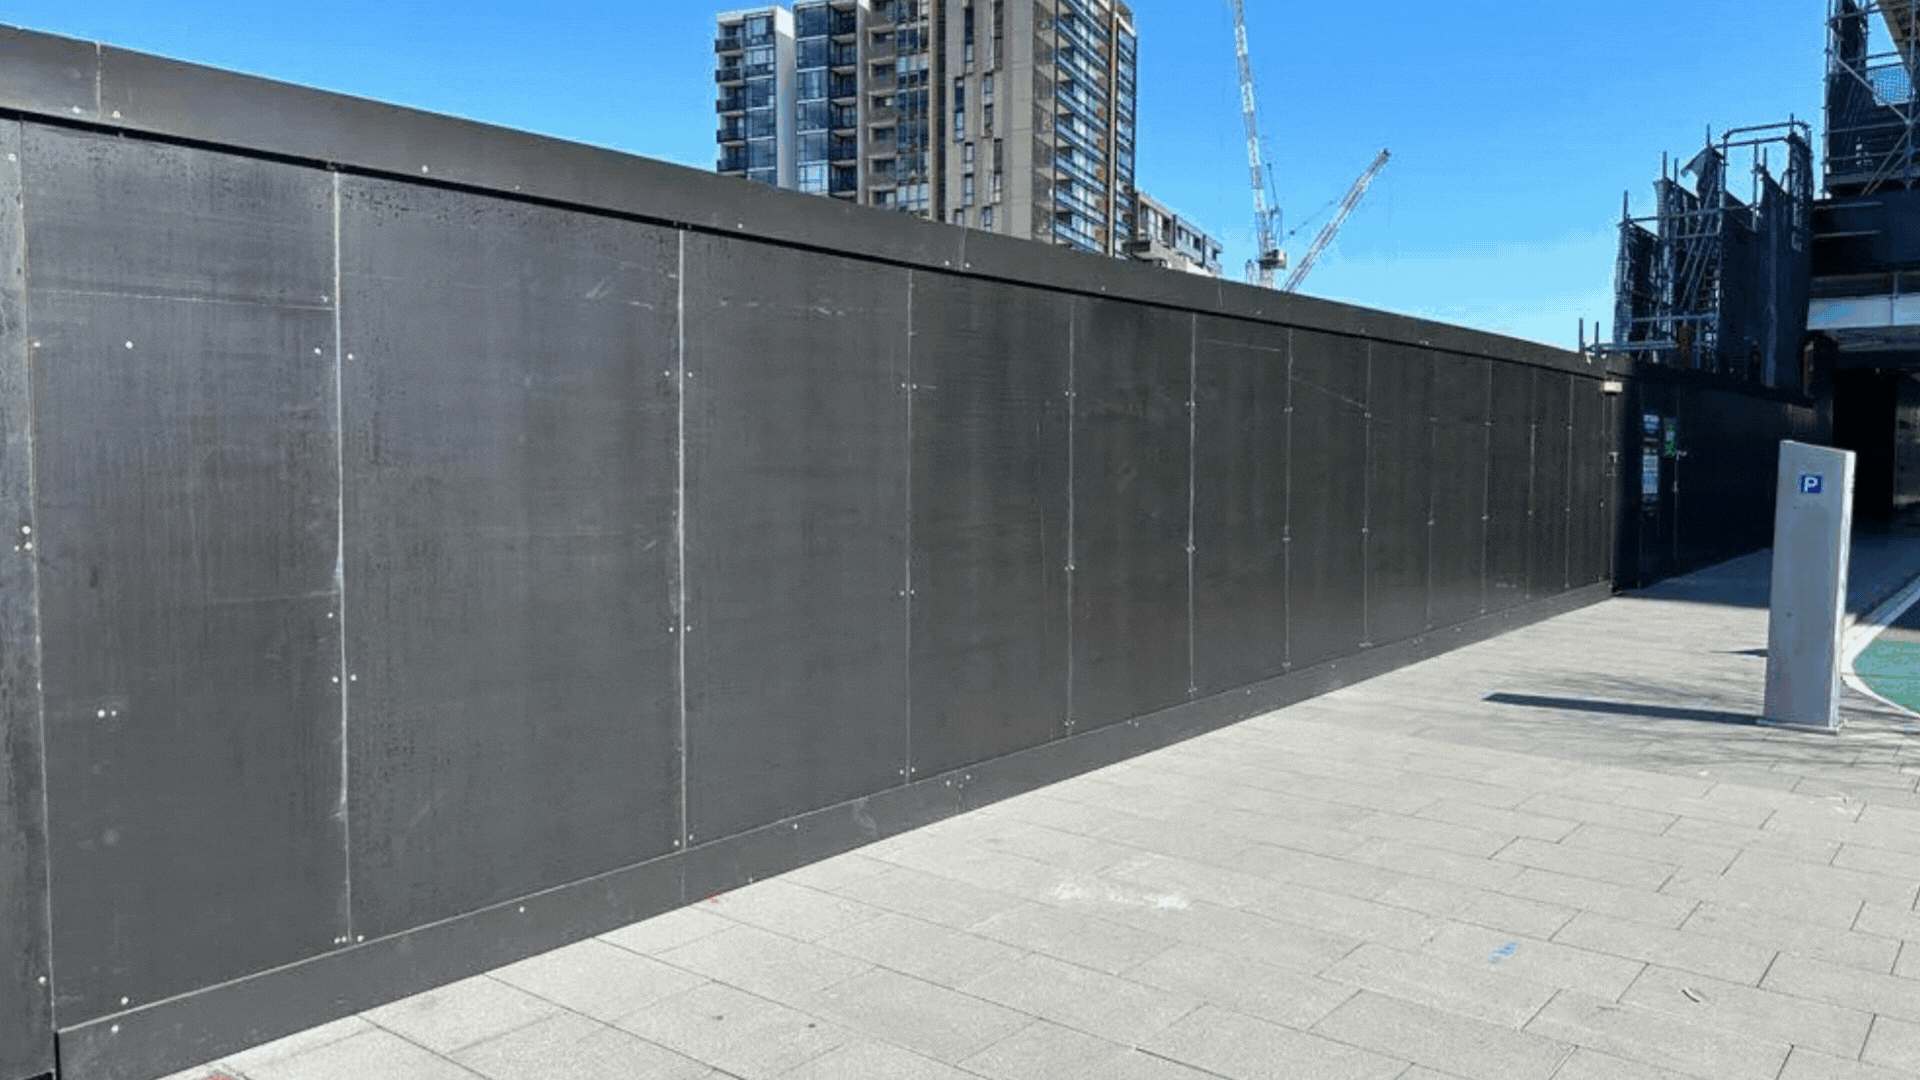 CITY OF SYDNEY HOARDINGS | WHAT MAKES US THE EXPERTS...